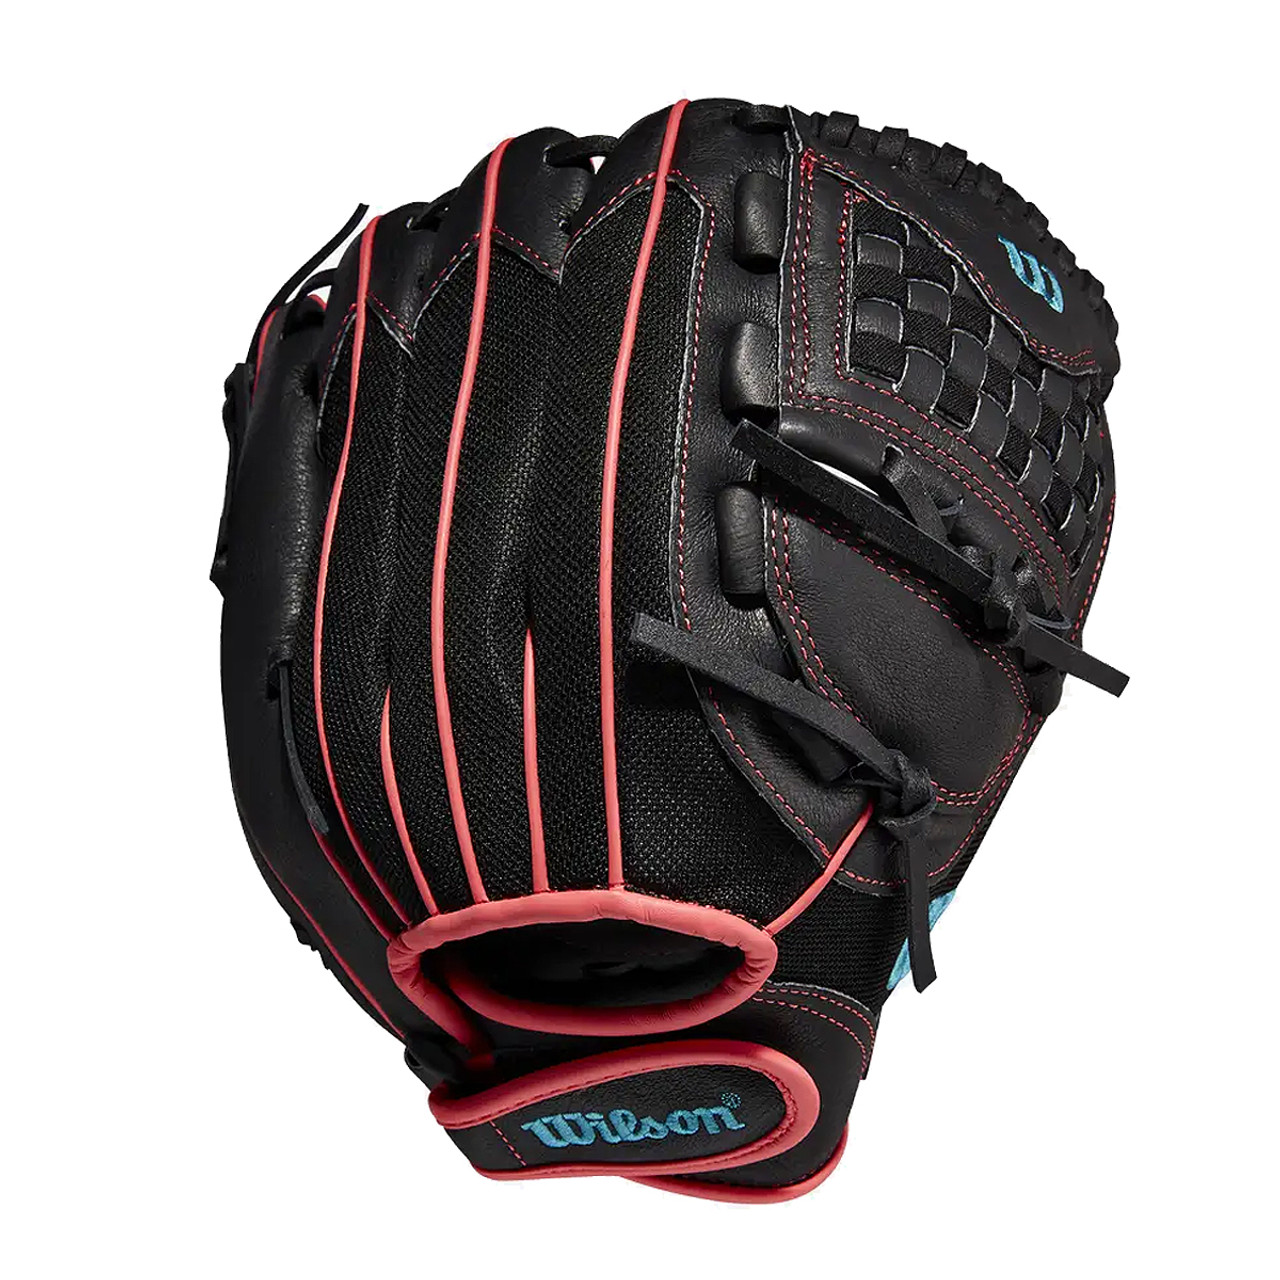 How to find the right softball gloves for infielders?